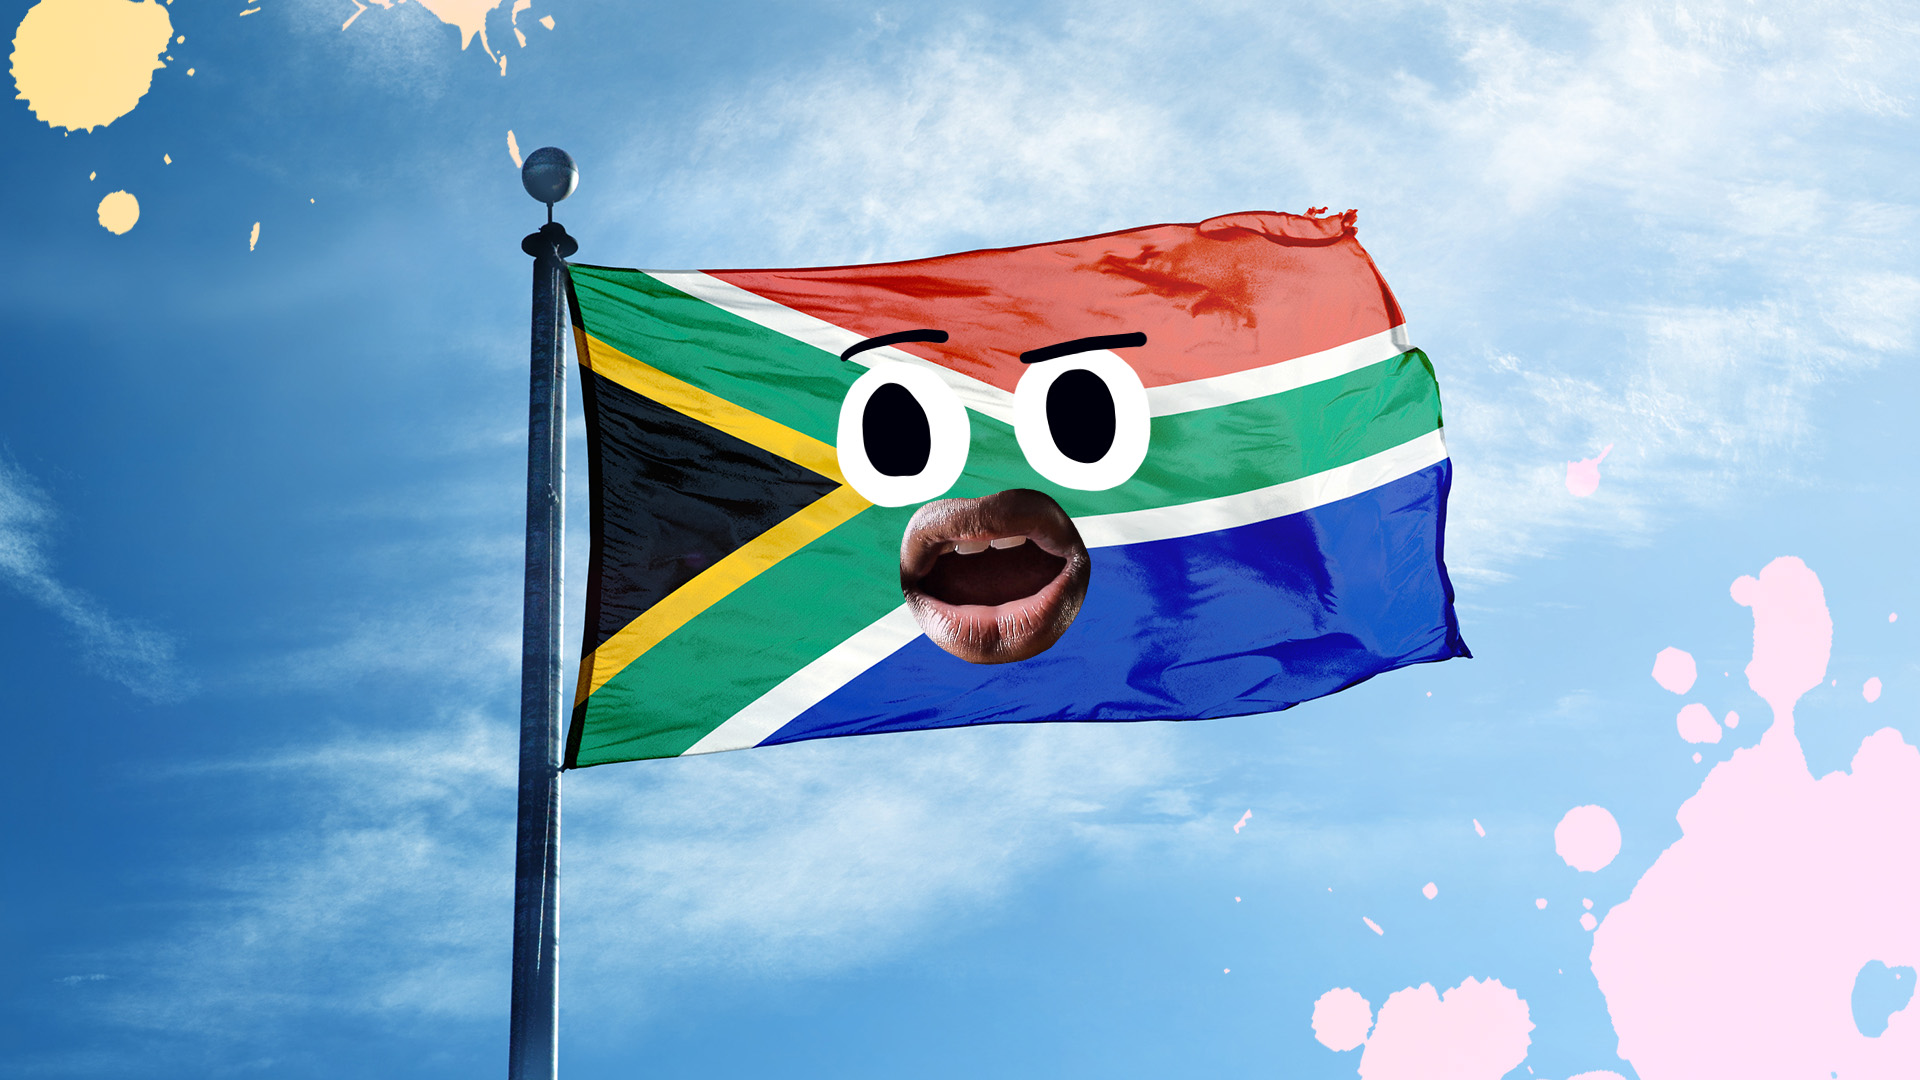 A flag of a country on the African continent